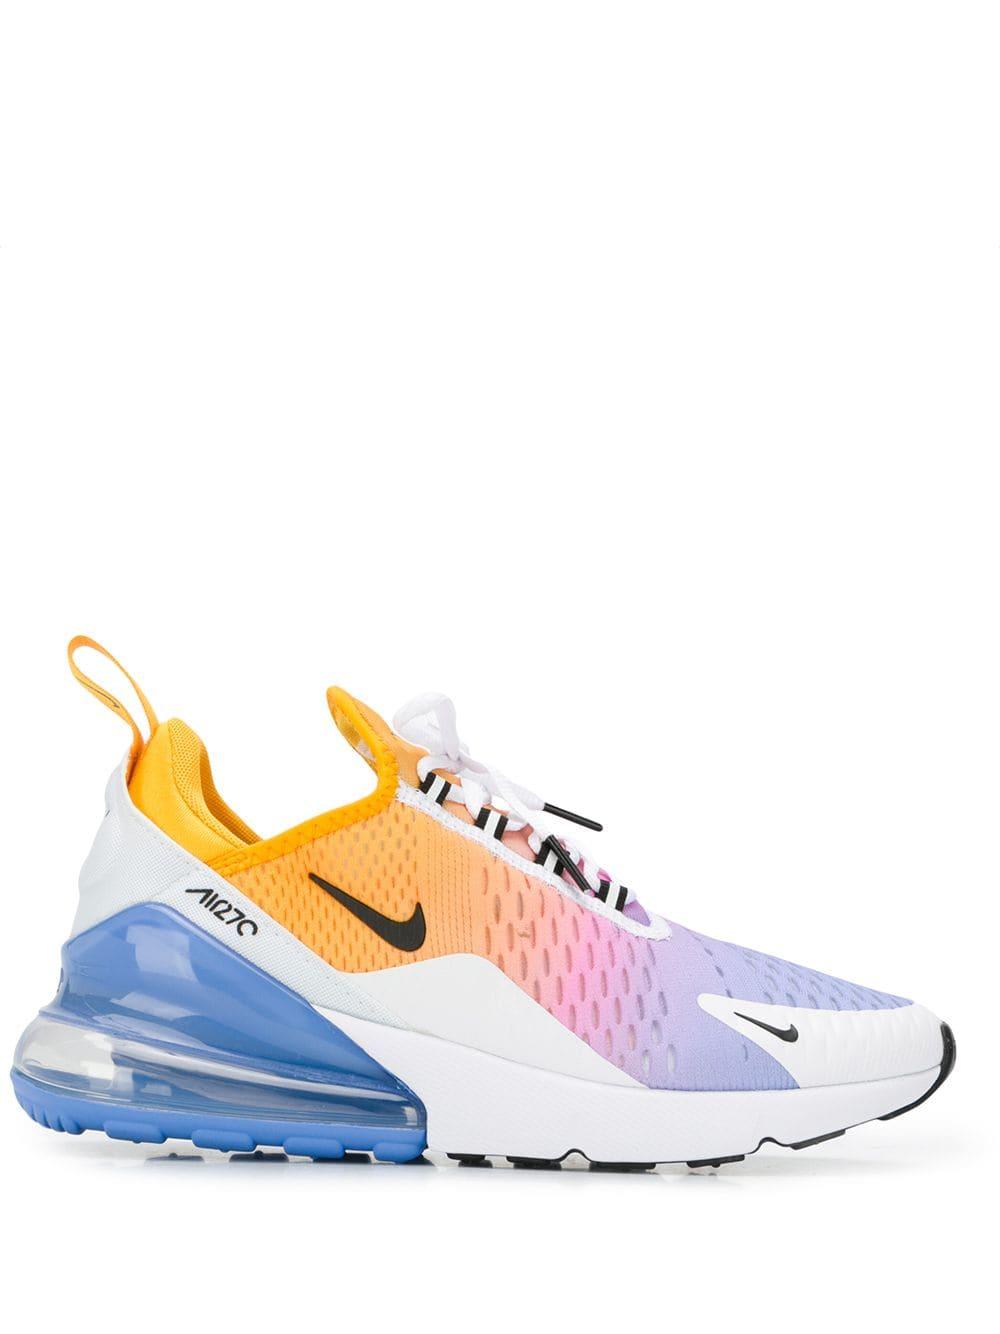 buy > air max 270 purple yellow, Up to 73% OFF